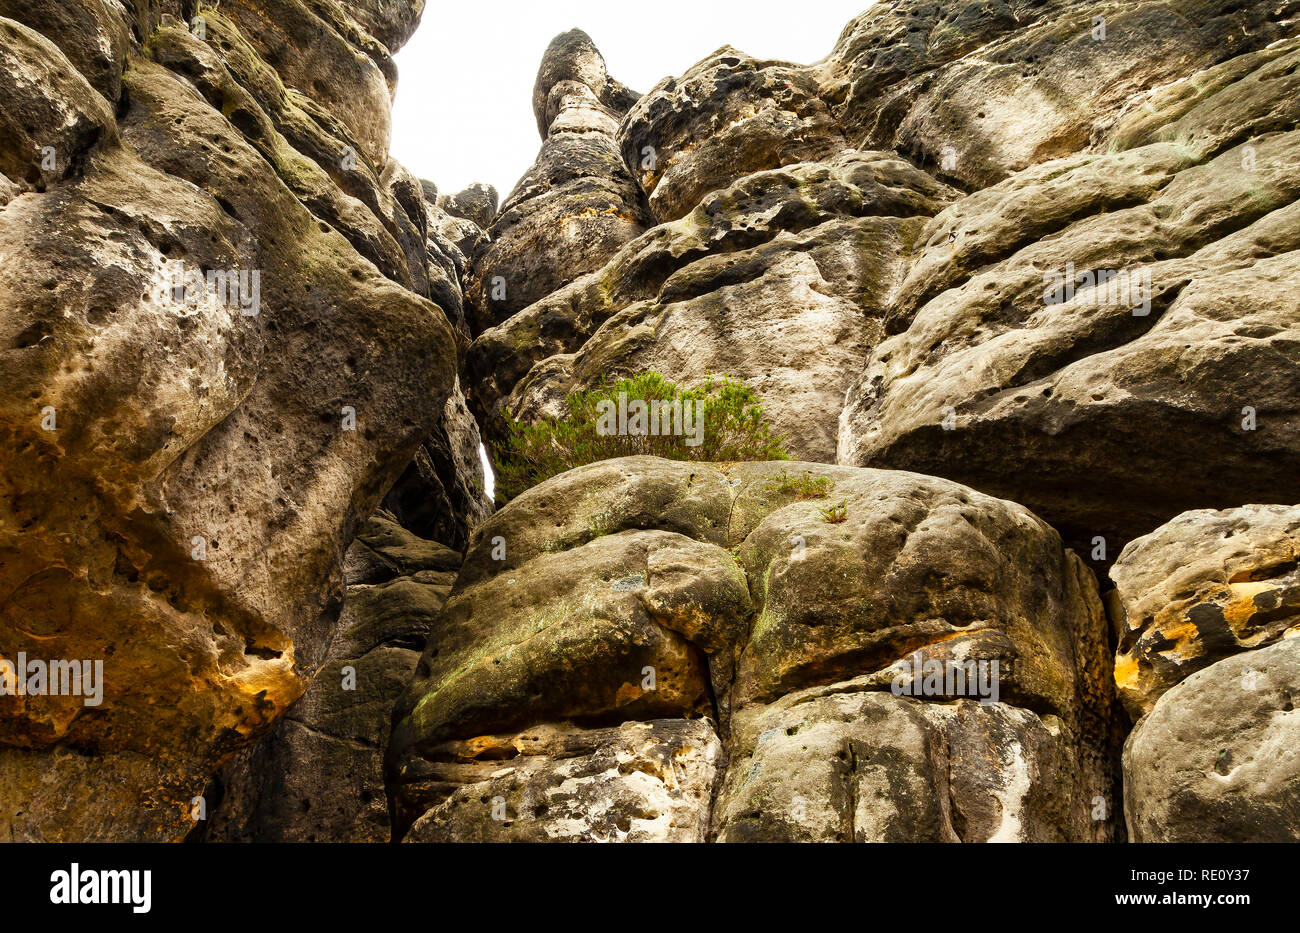 Huge Rockface of sandstone with bizarre formations Stock Photo